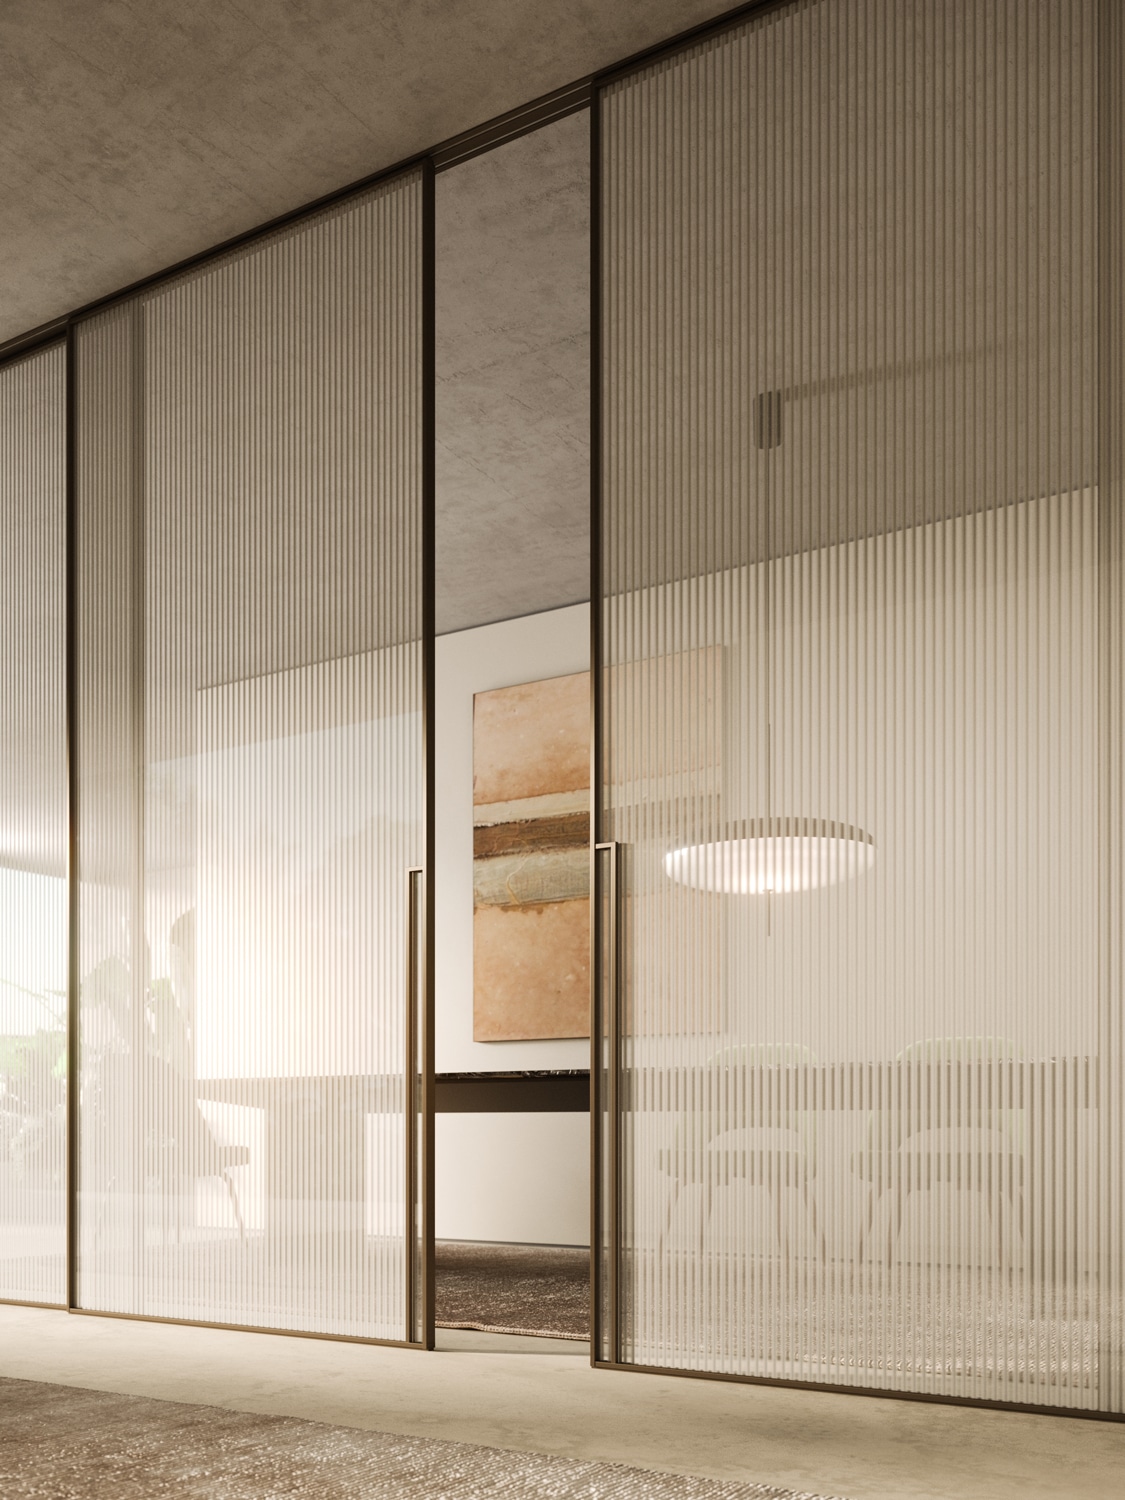 Using the synergies between glass and light, the new Canneté decoration brings an elegant visual movement to the doors that reverberates into the whole environment.